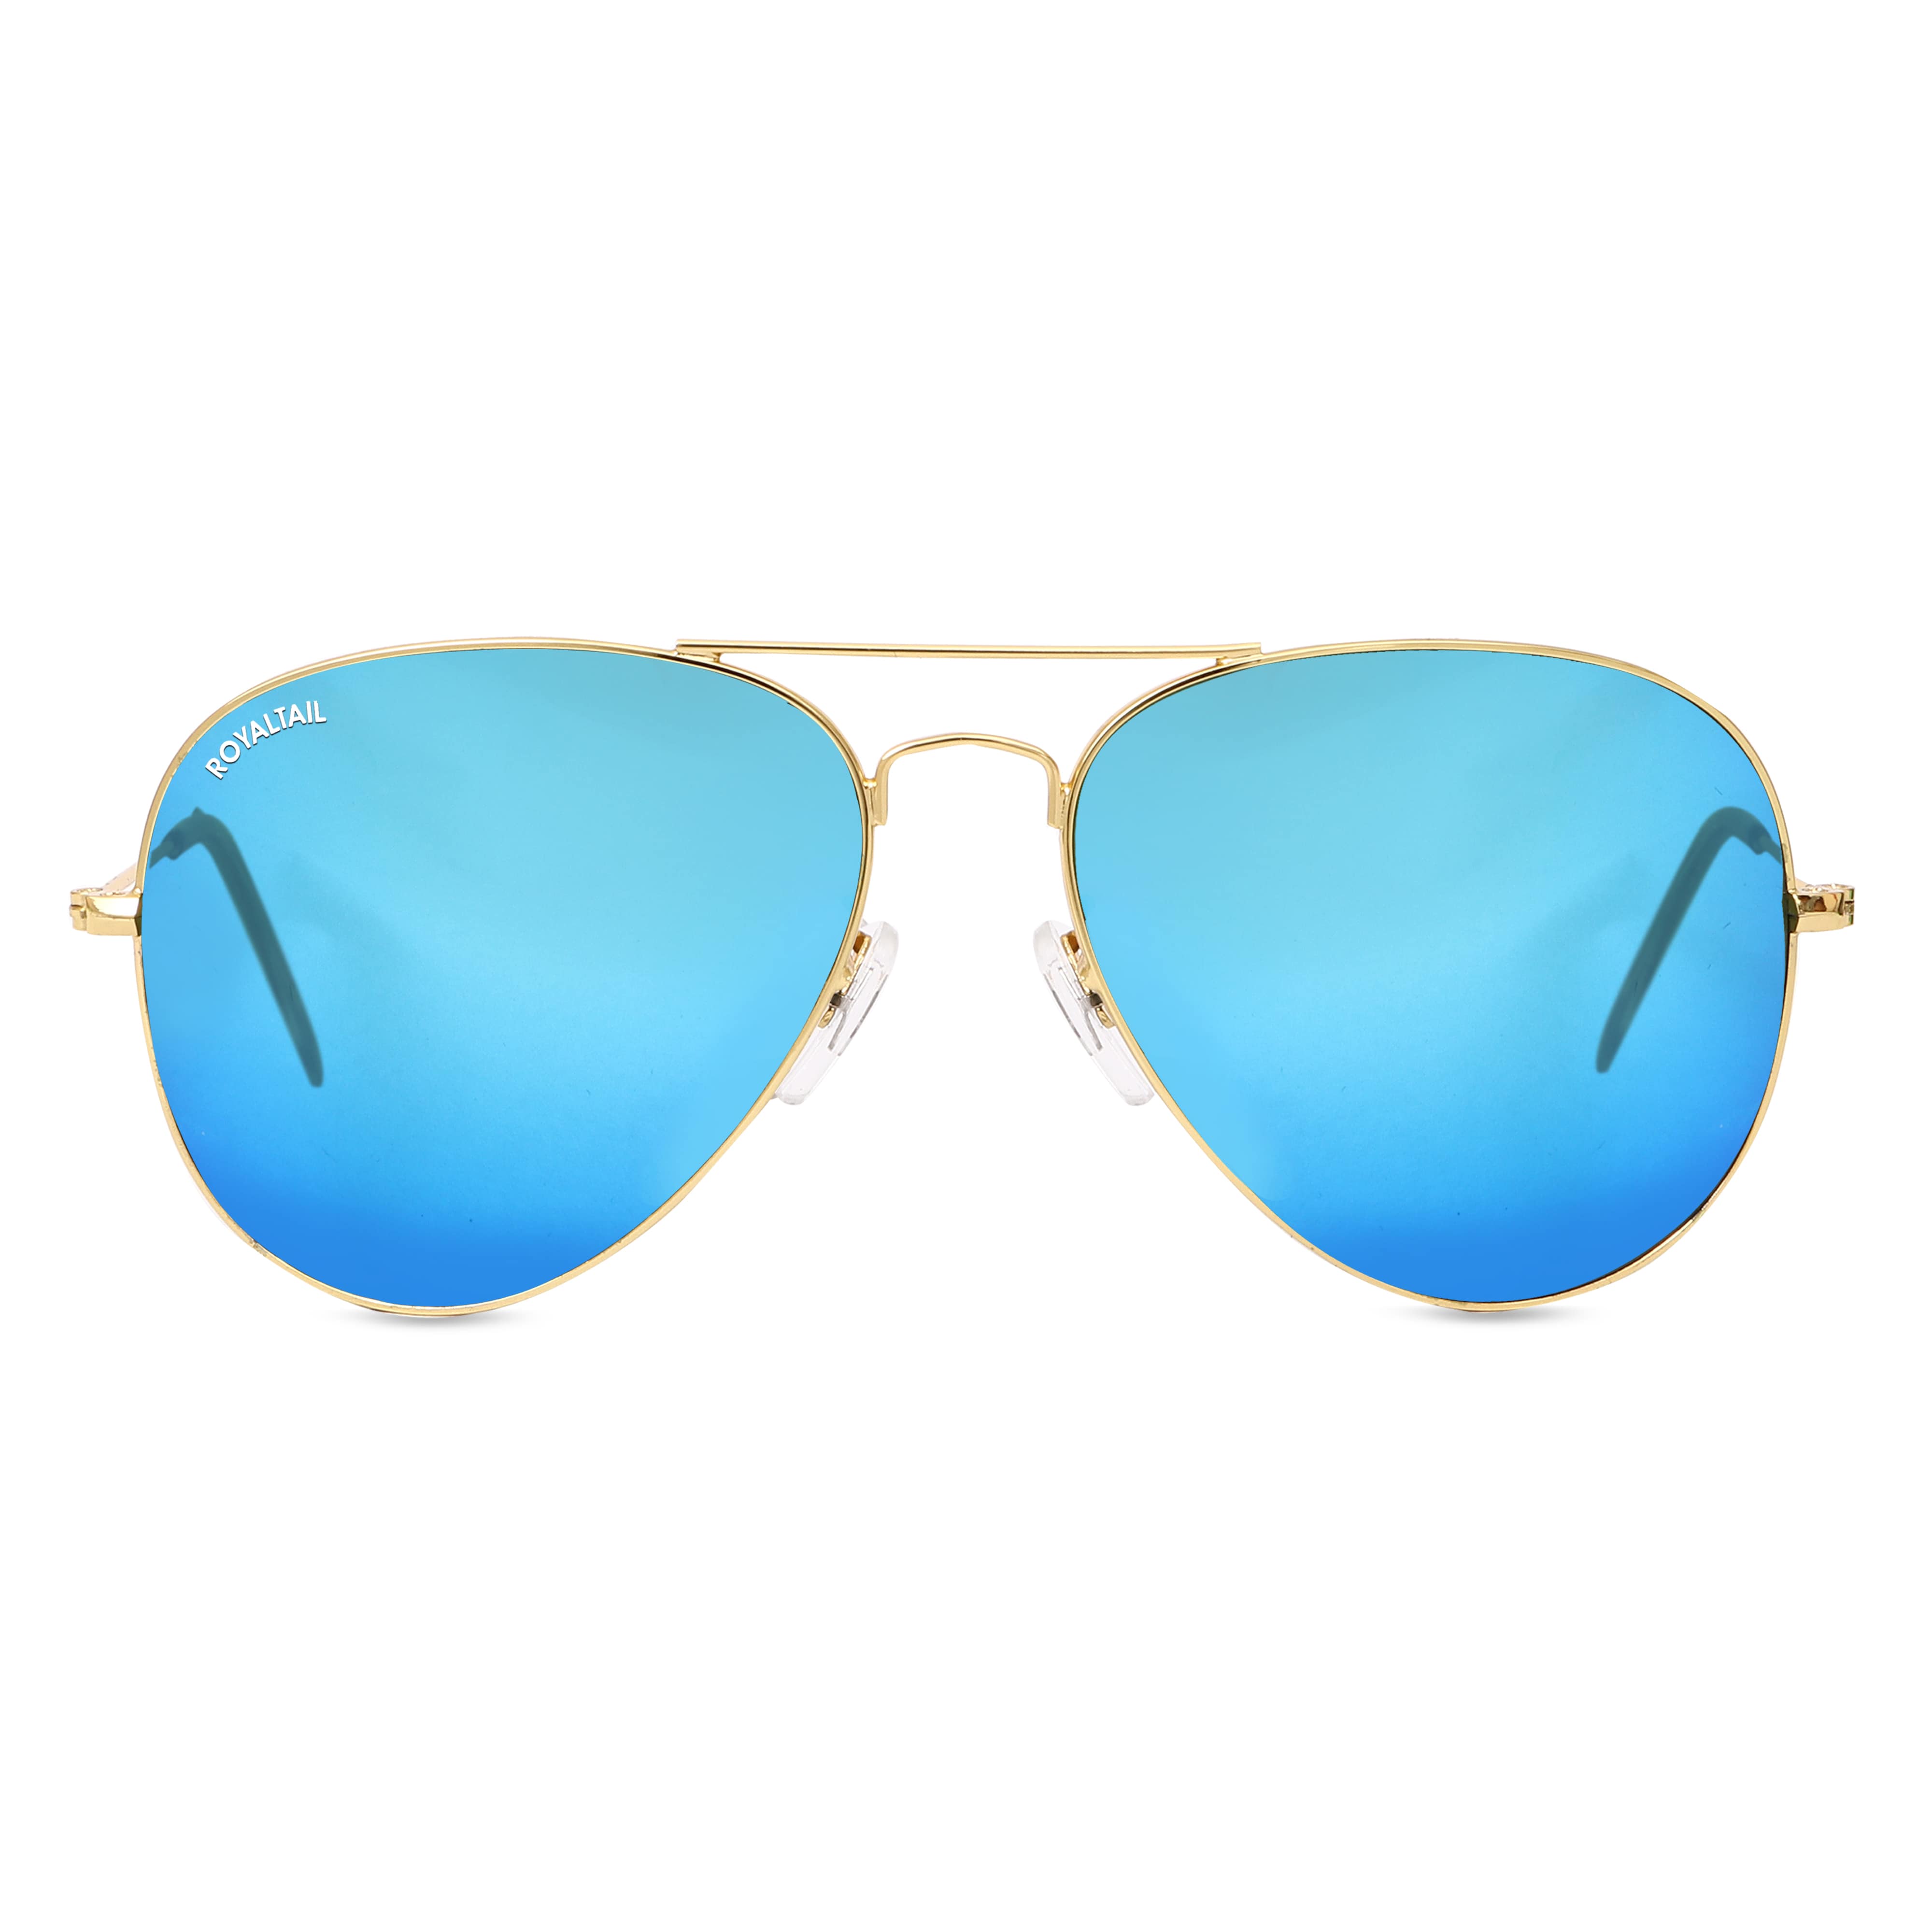 Aviator sunglasses Made in USA 1300 Series 23k gold-plated